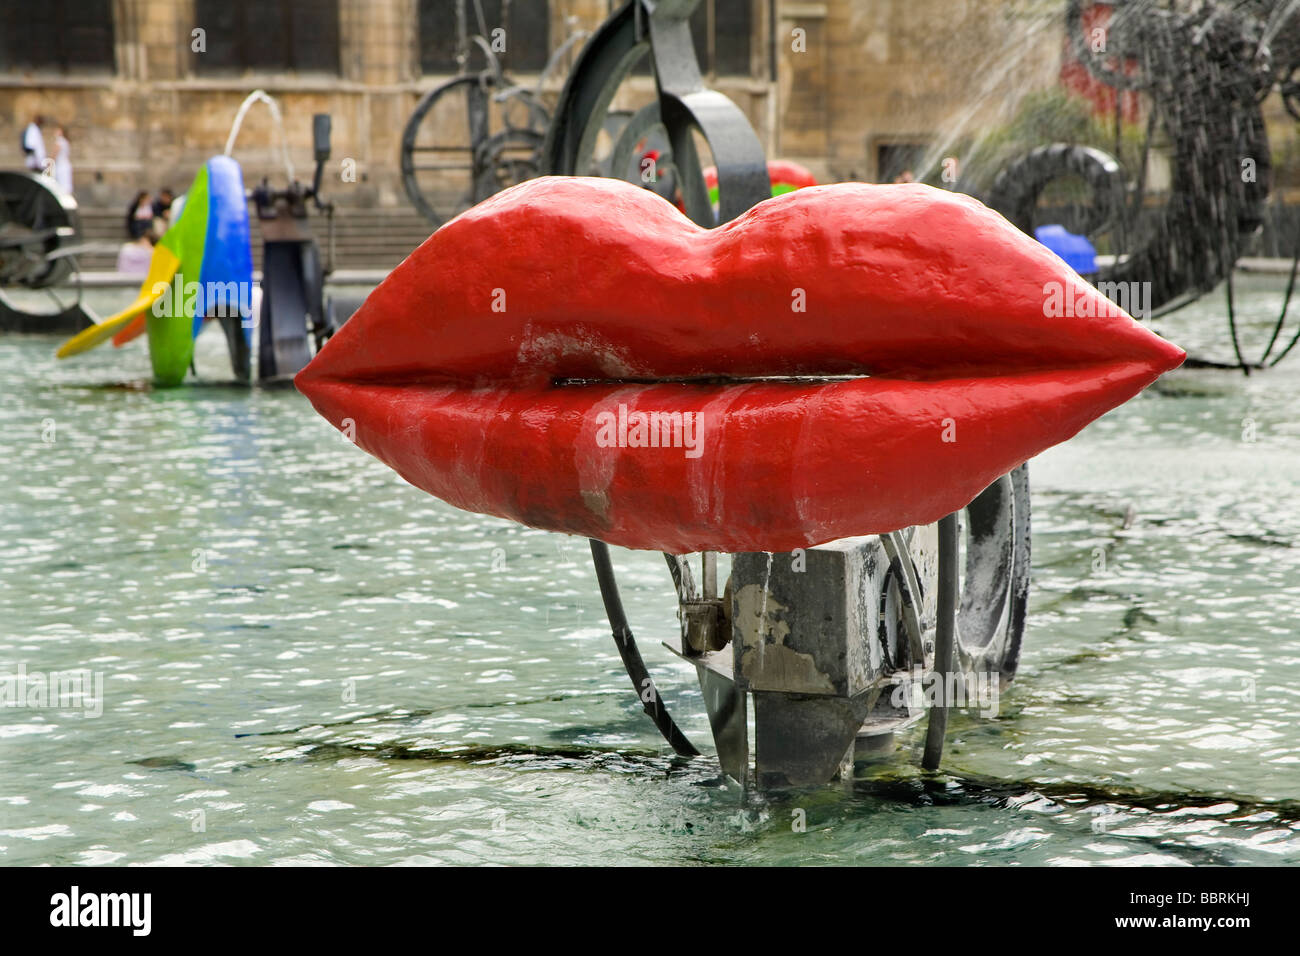 Love, the lips,  L'Amour (les Lèvres) in Stravinsky fountain, Paris, France, Europe Stock Photo